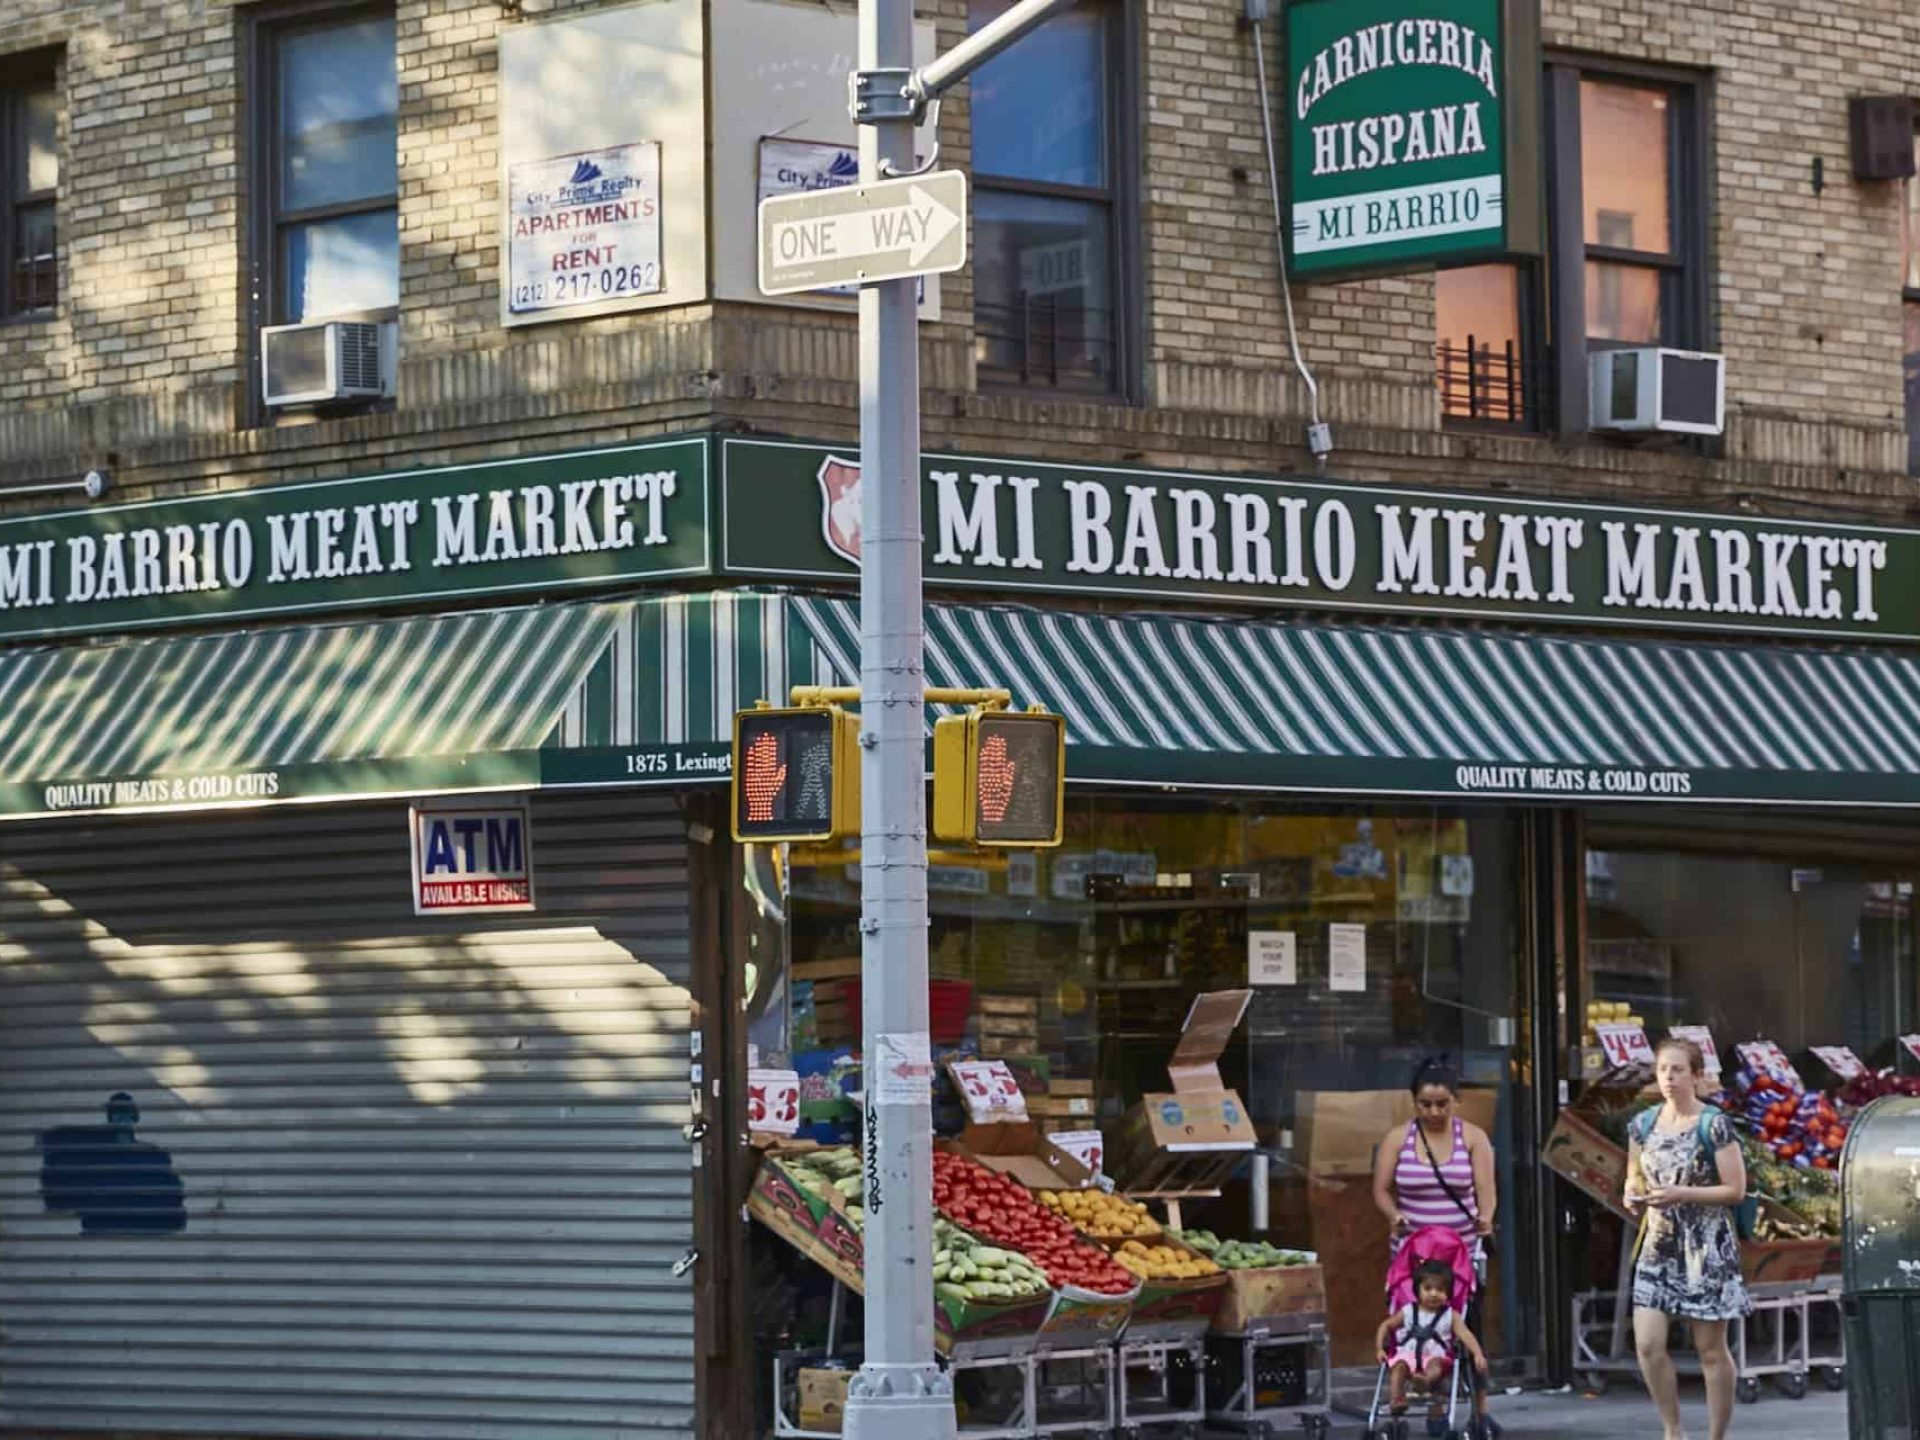 Exterior view of Mi Barrio Meat Market in East Harlem. Brick building with large windows, metal security door and an awning.